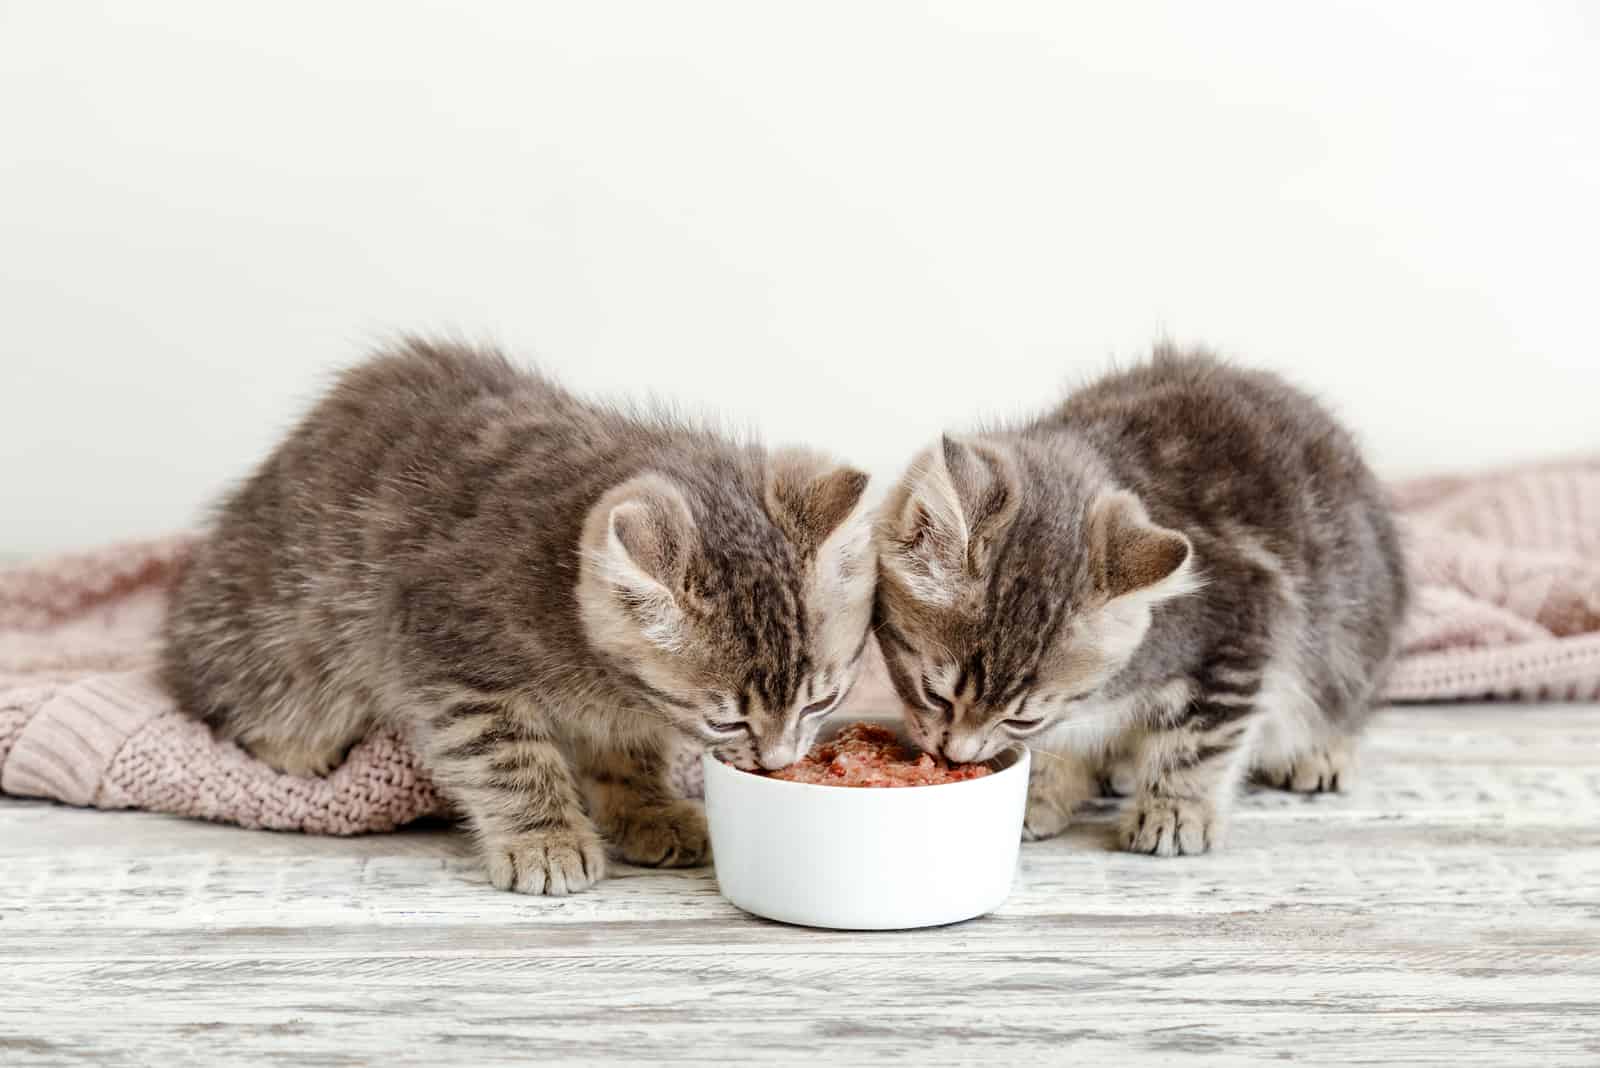 kittens eat food from a bowl